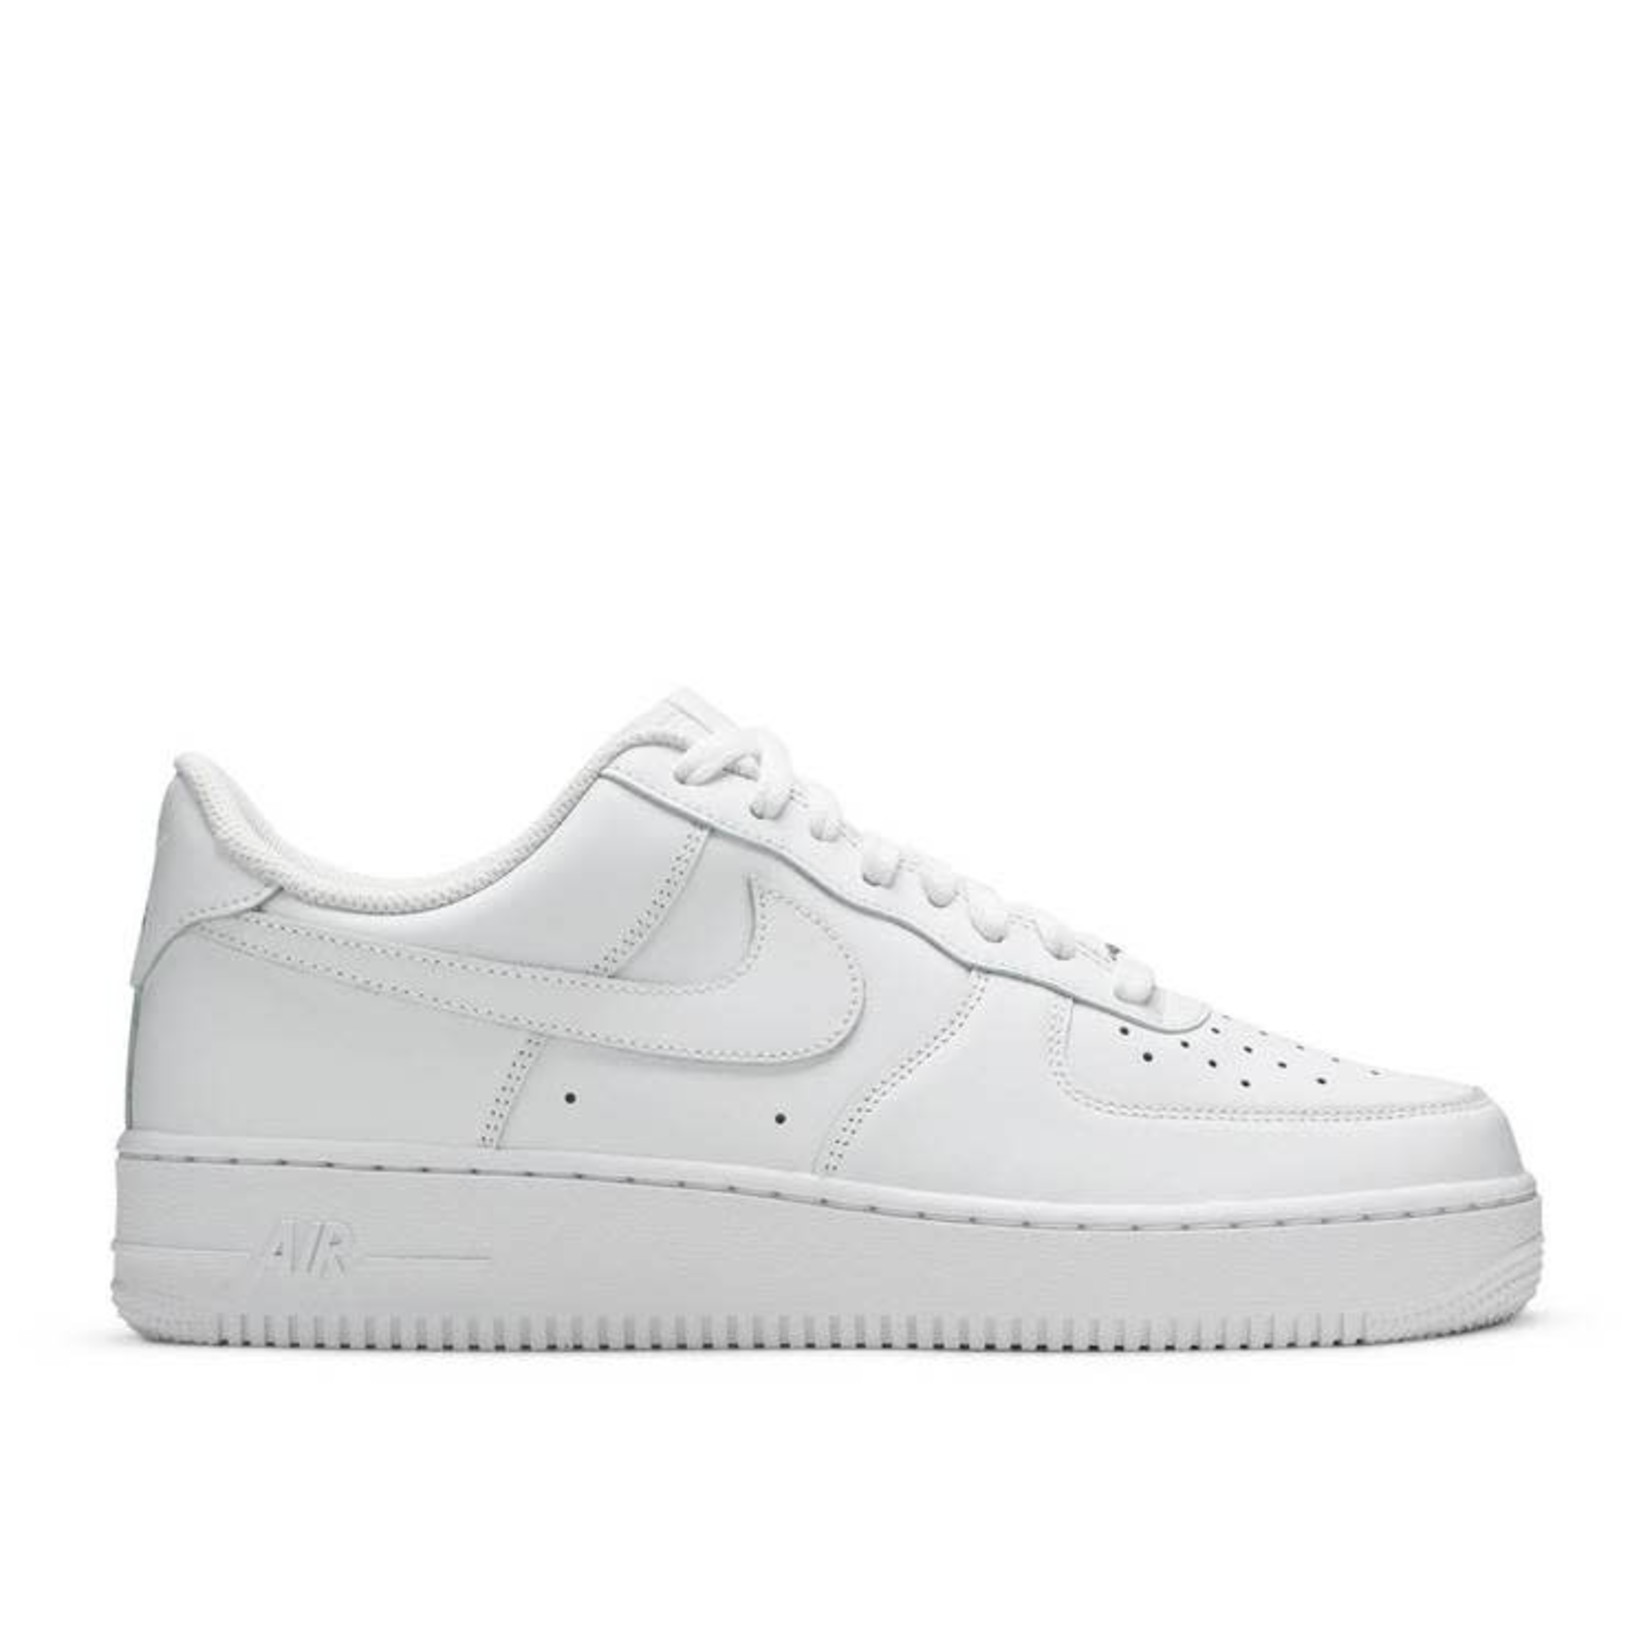 Nike Nike Air Force 1 Low '07 White Size 10, DS BRAND NEW